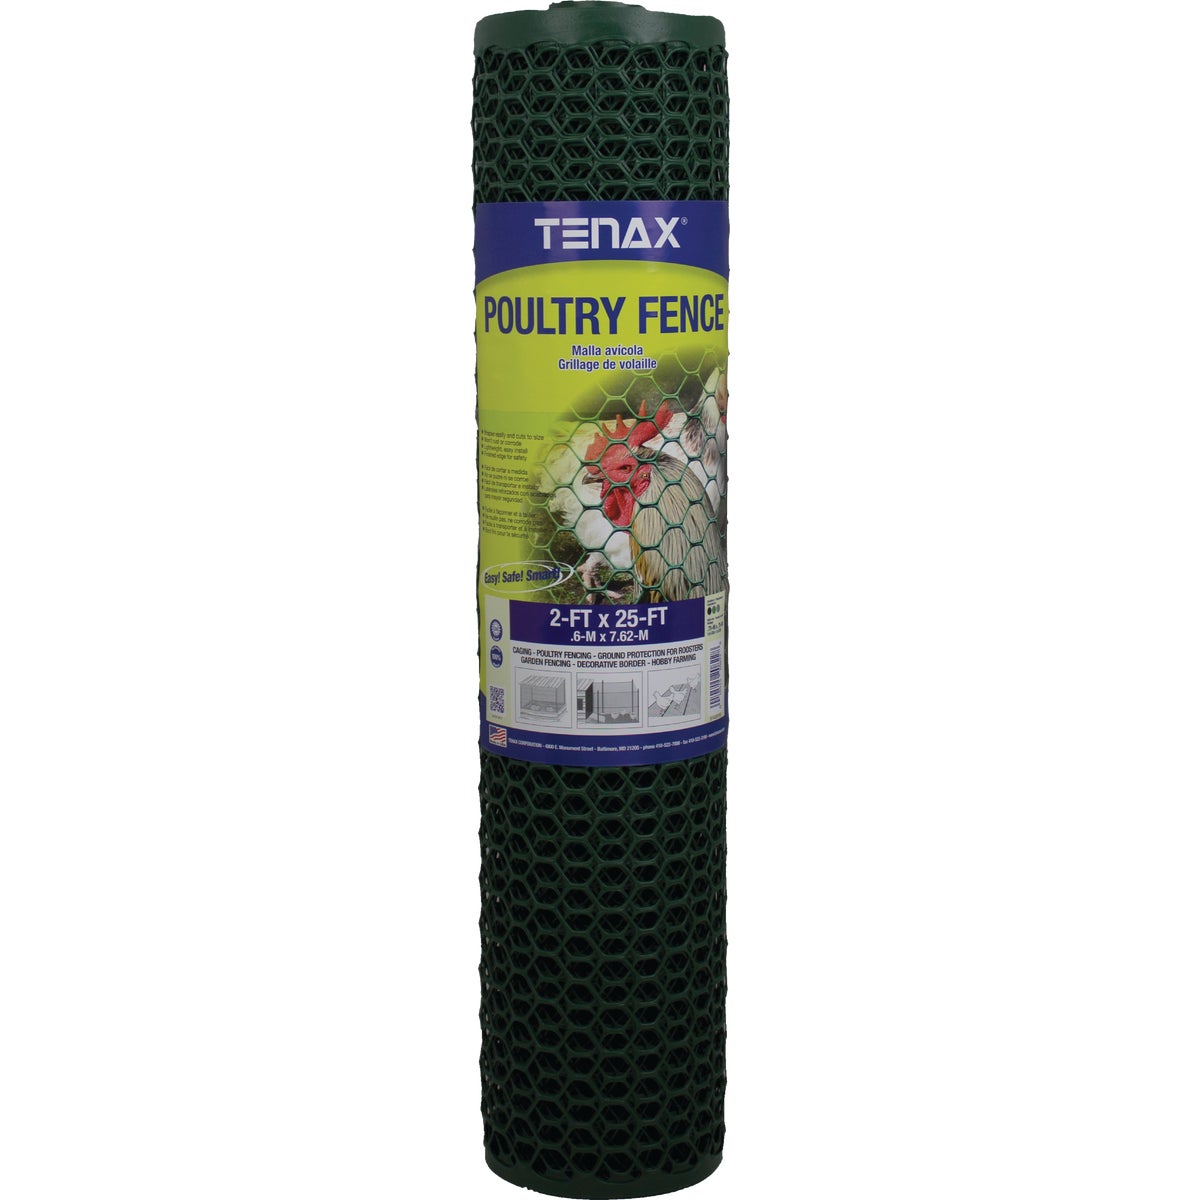 Item 707282, Hexagonal plastic mesh is identical to its metal counterpart in its mesh 